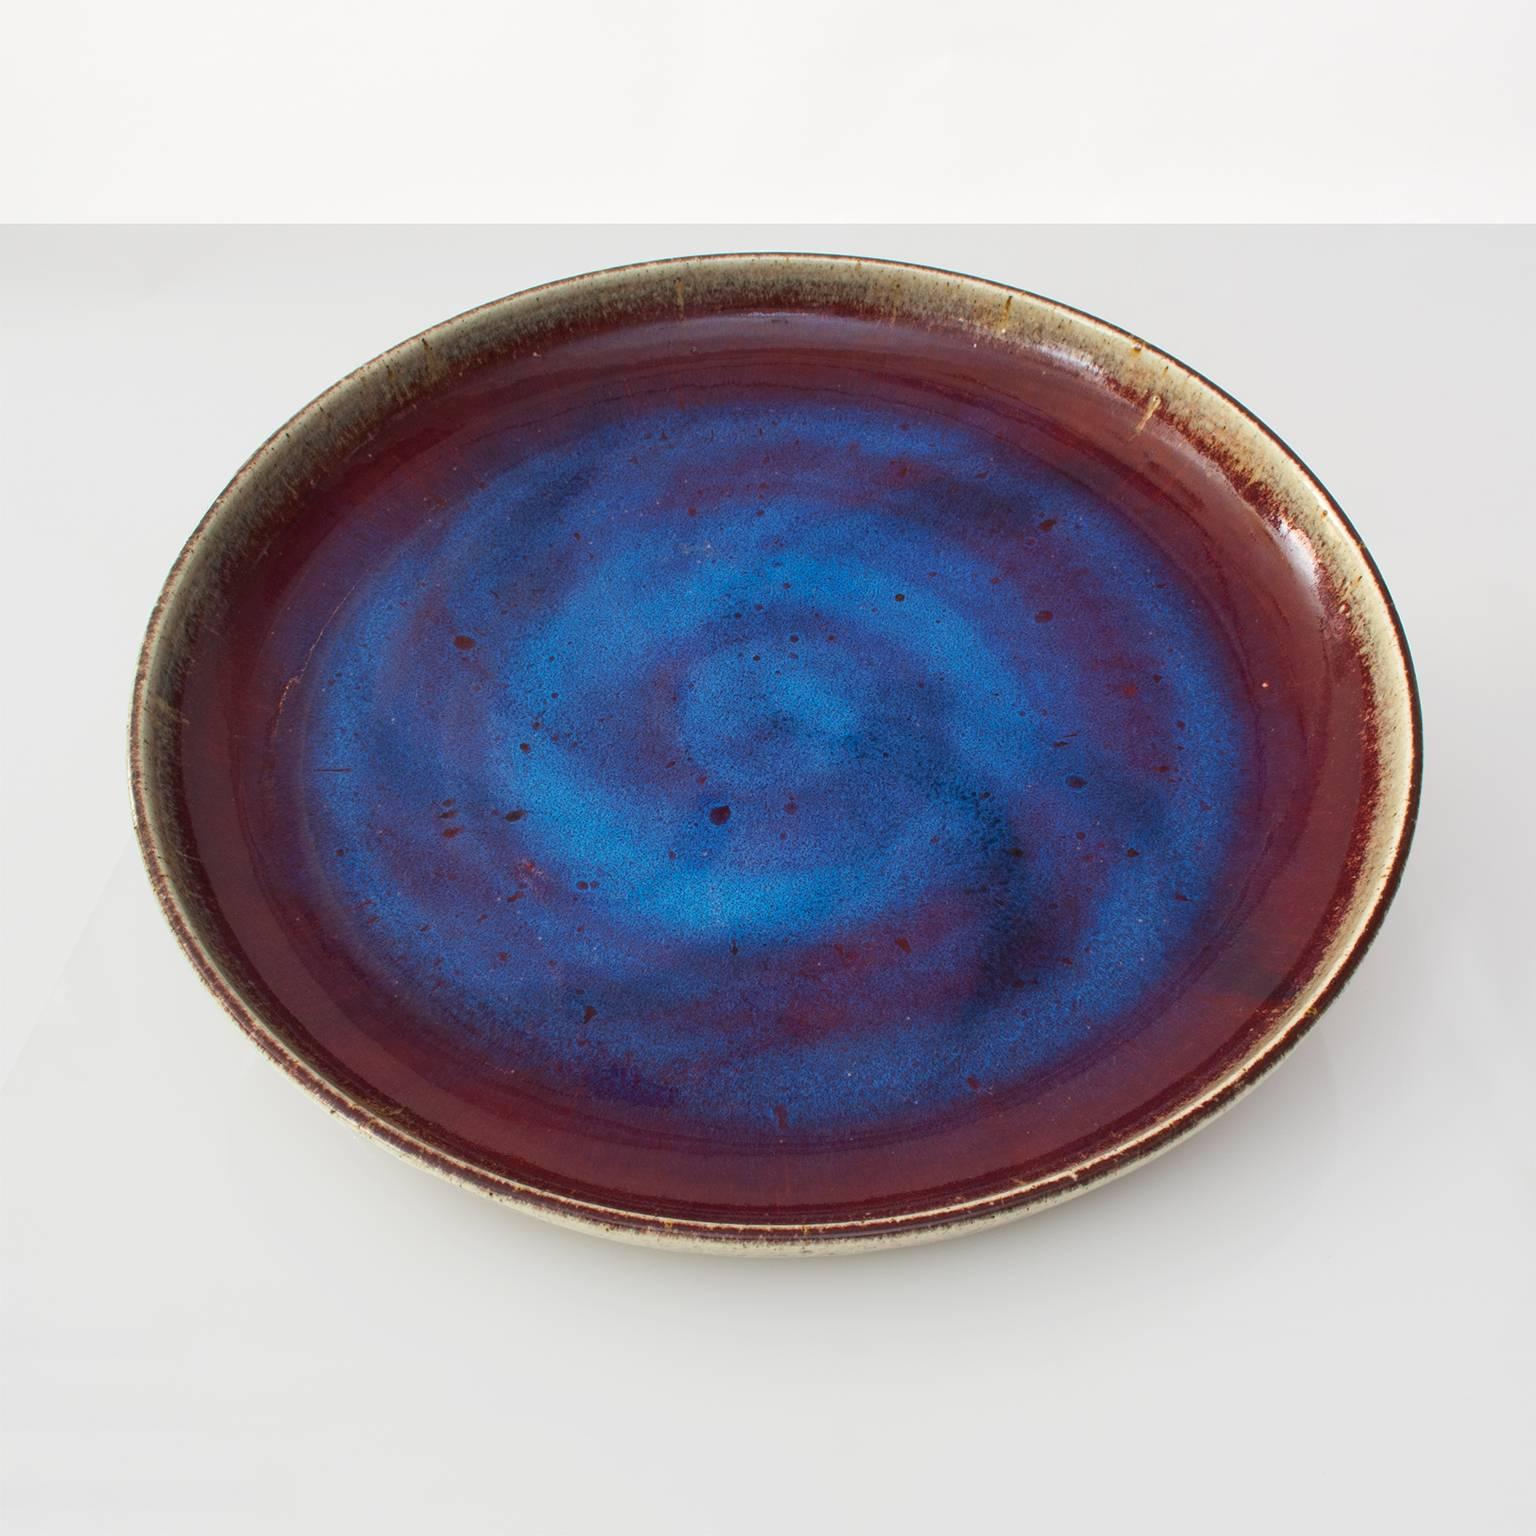 A very large Scandinavian Modern midcentury Rorstrand studio bowl or platter by Bertil Lindgren with oxblood and a brilliant sapphire blue glaze. Signed on the bottom as well as numbered "97 / 100". Diameter: 21", Height: 3"